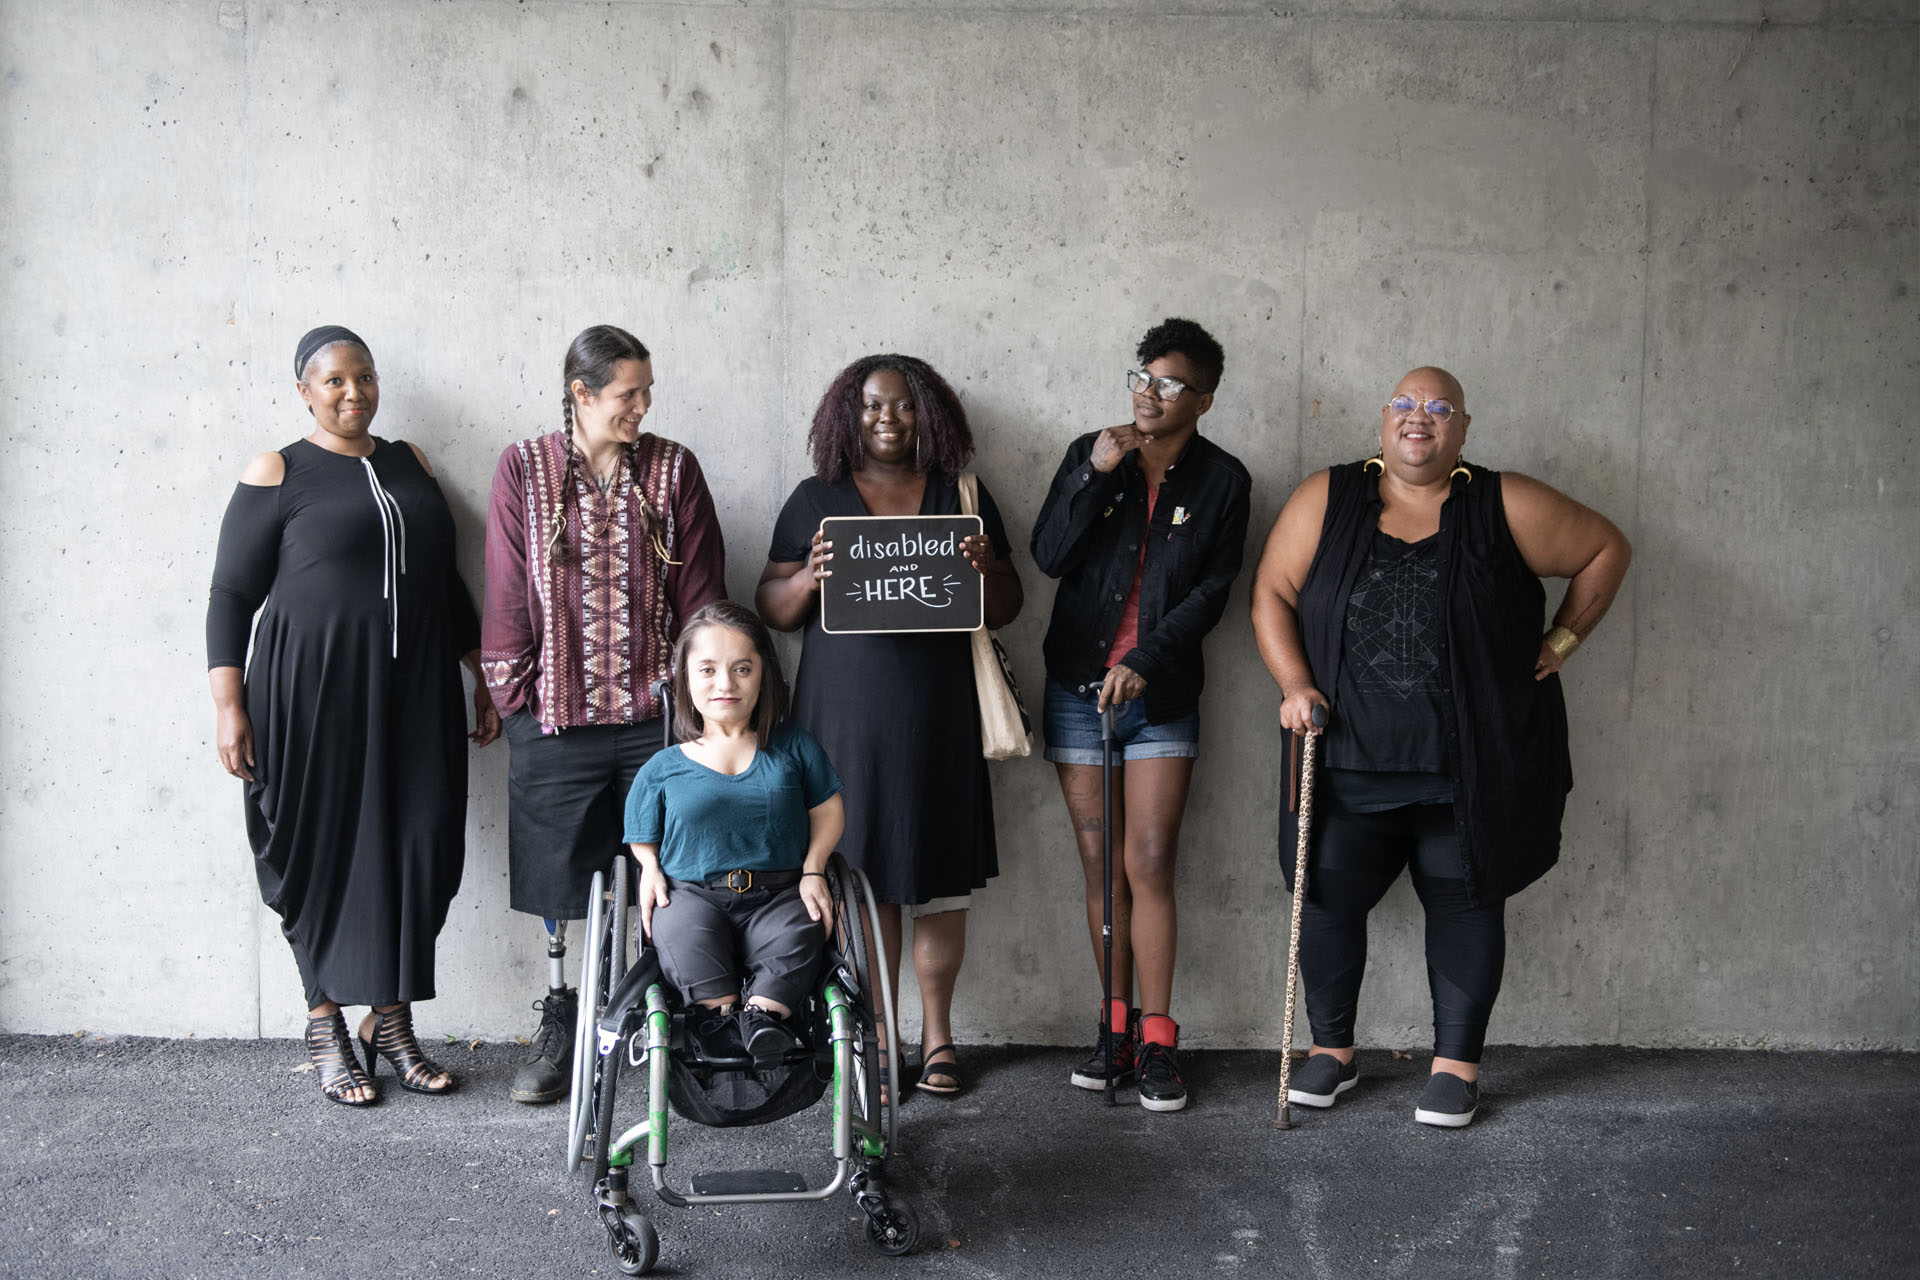 Six disabled people smile and pose in front of a concrete wall. Five people stand in the back, with a person in the center holding up a chalkboard sign reading 'disabled and here.' A person in a wheelchair sits in front. Image courtesy of Disabled and Here.